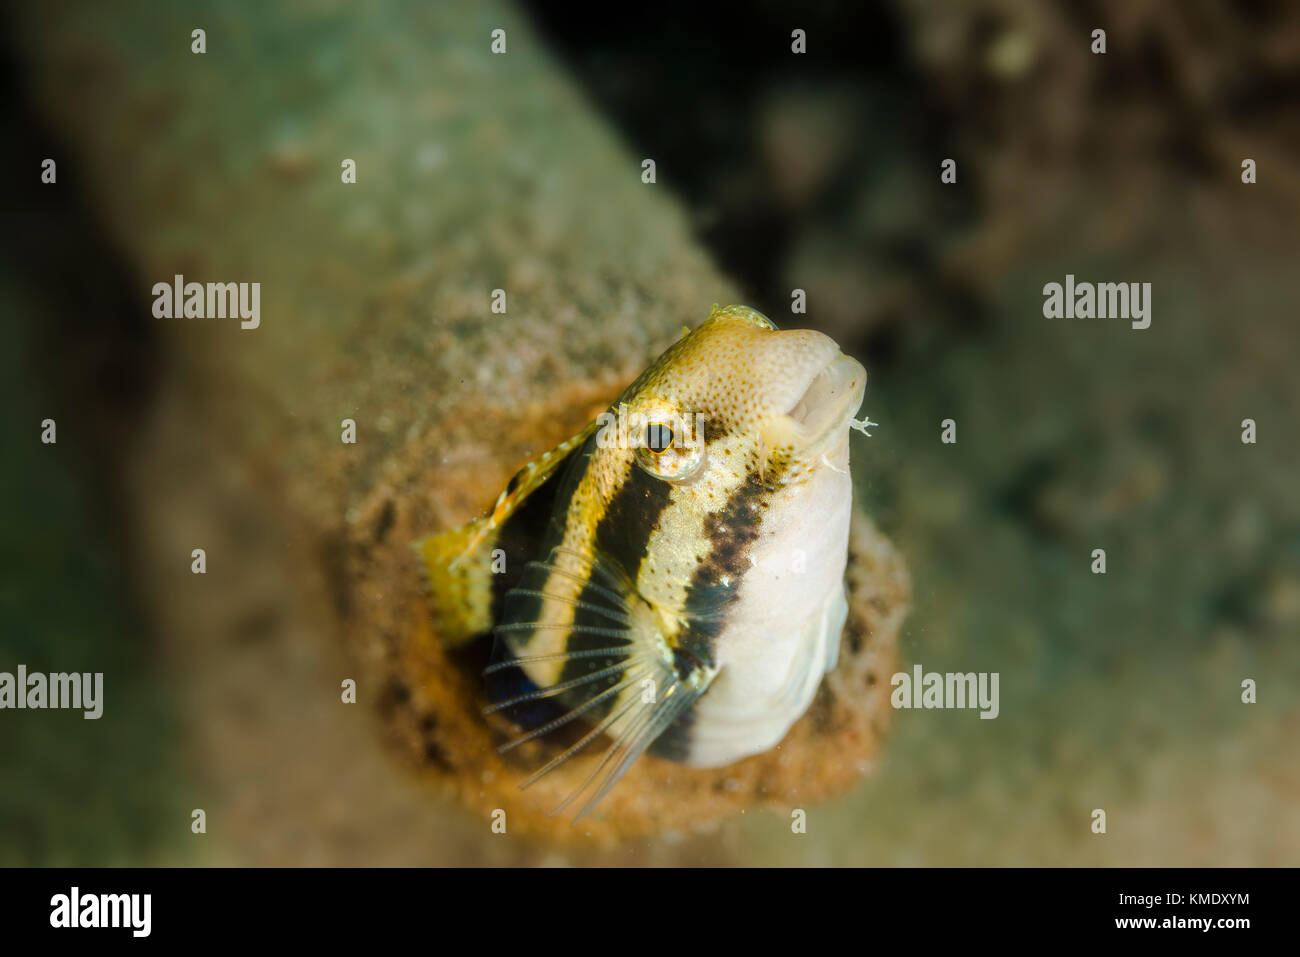 Striped blenny peaking out from a hollow piece of wood Stock Photo